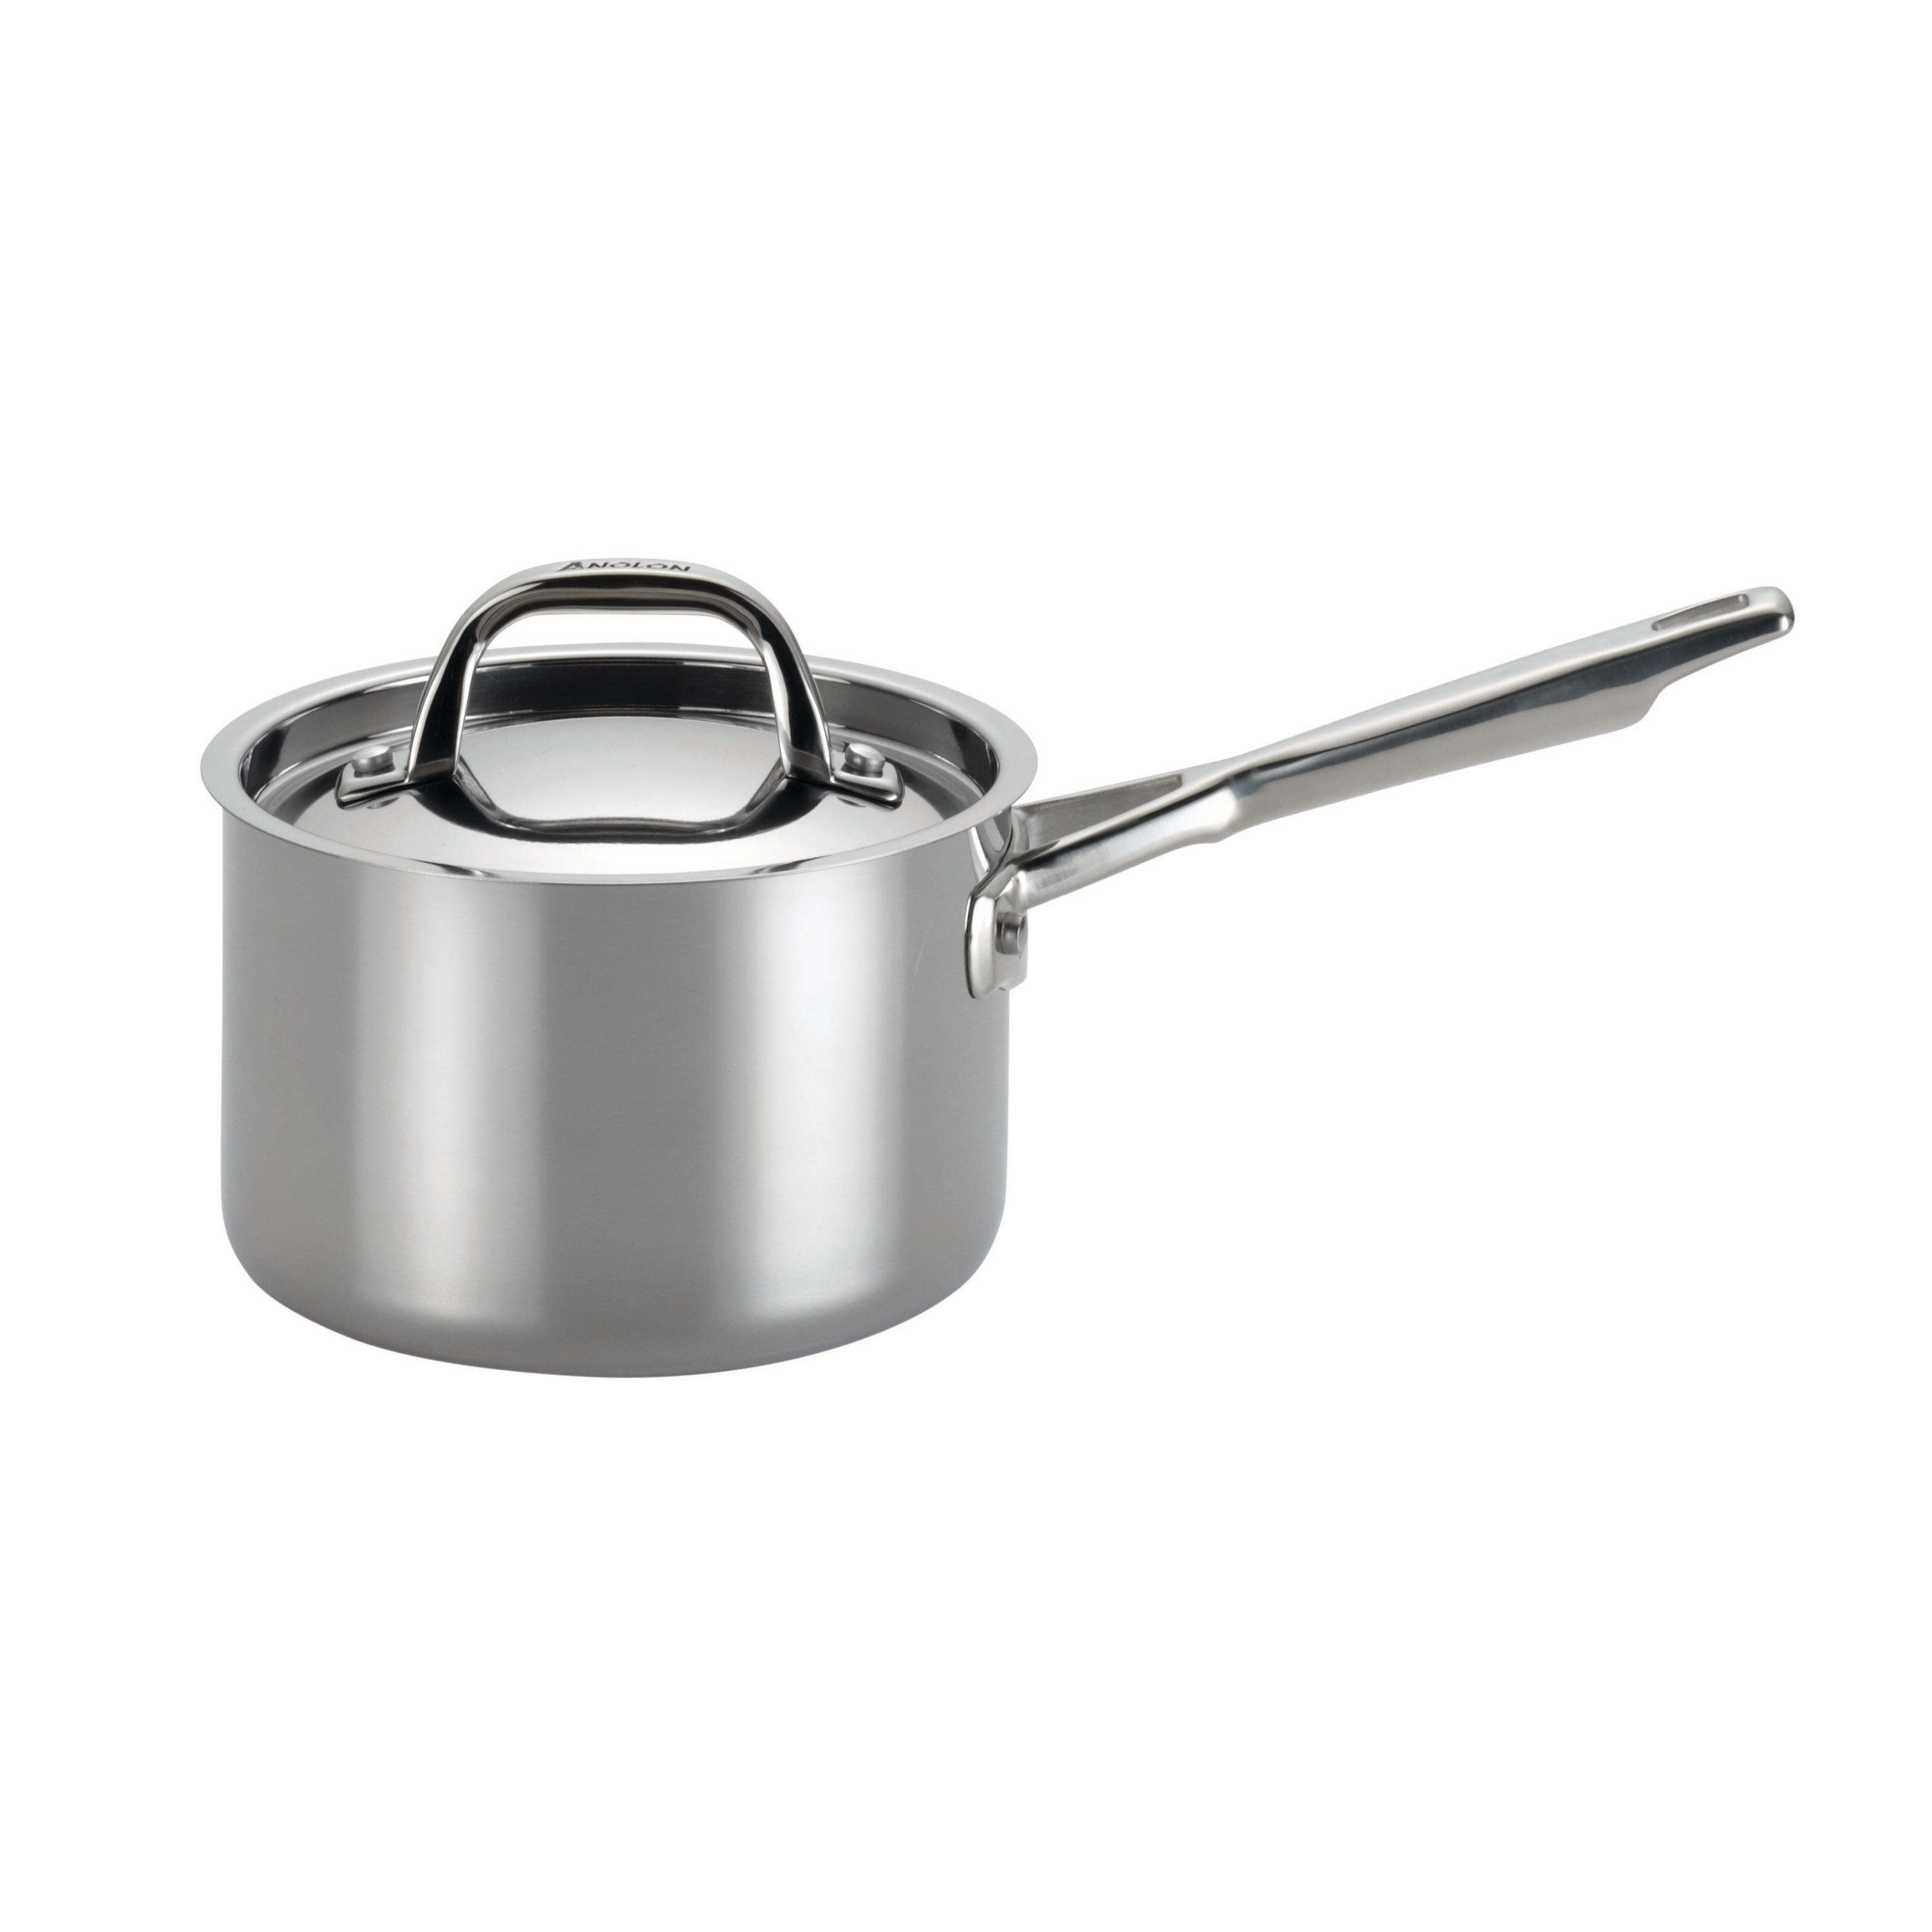 OXO Good Grips Tri-Ply Stainless Steel Pro 3.5QT Covered Saucepan